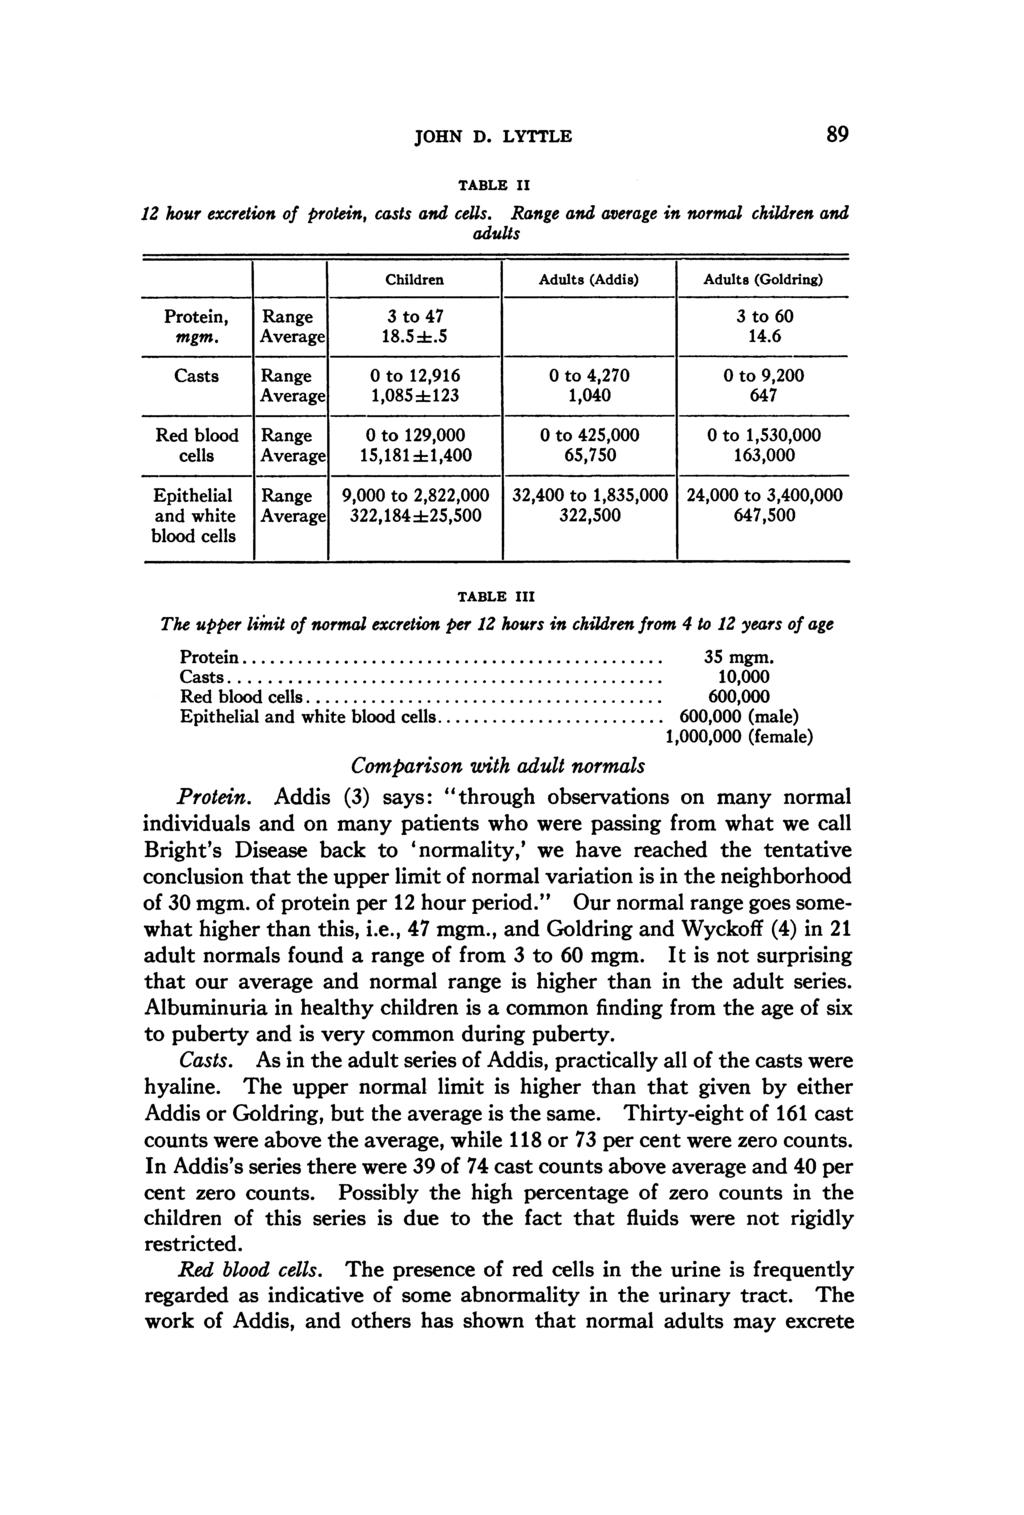 JOHN D. LYTTLE 89 TABLE II 12 hour excretion of protein, casts and cells. Range and average in normal adults children and Children Adults (Addis) Adults (Goldring) Protein, Range 3 to 47 3 to 60 mgm.